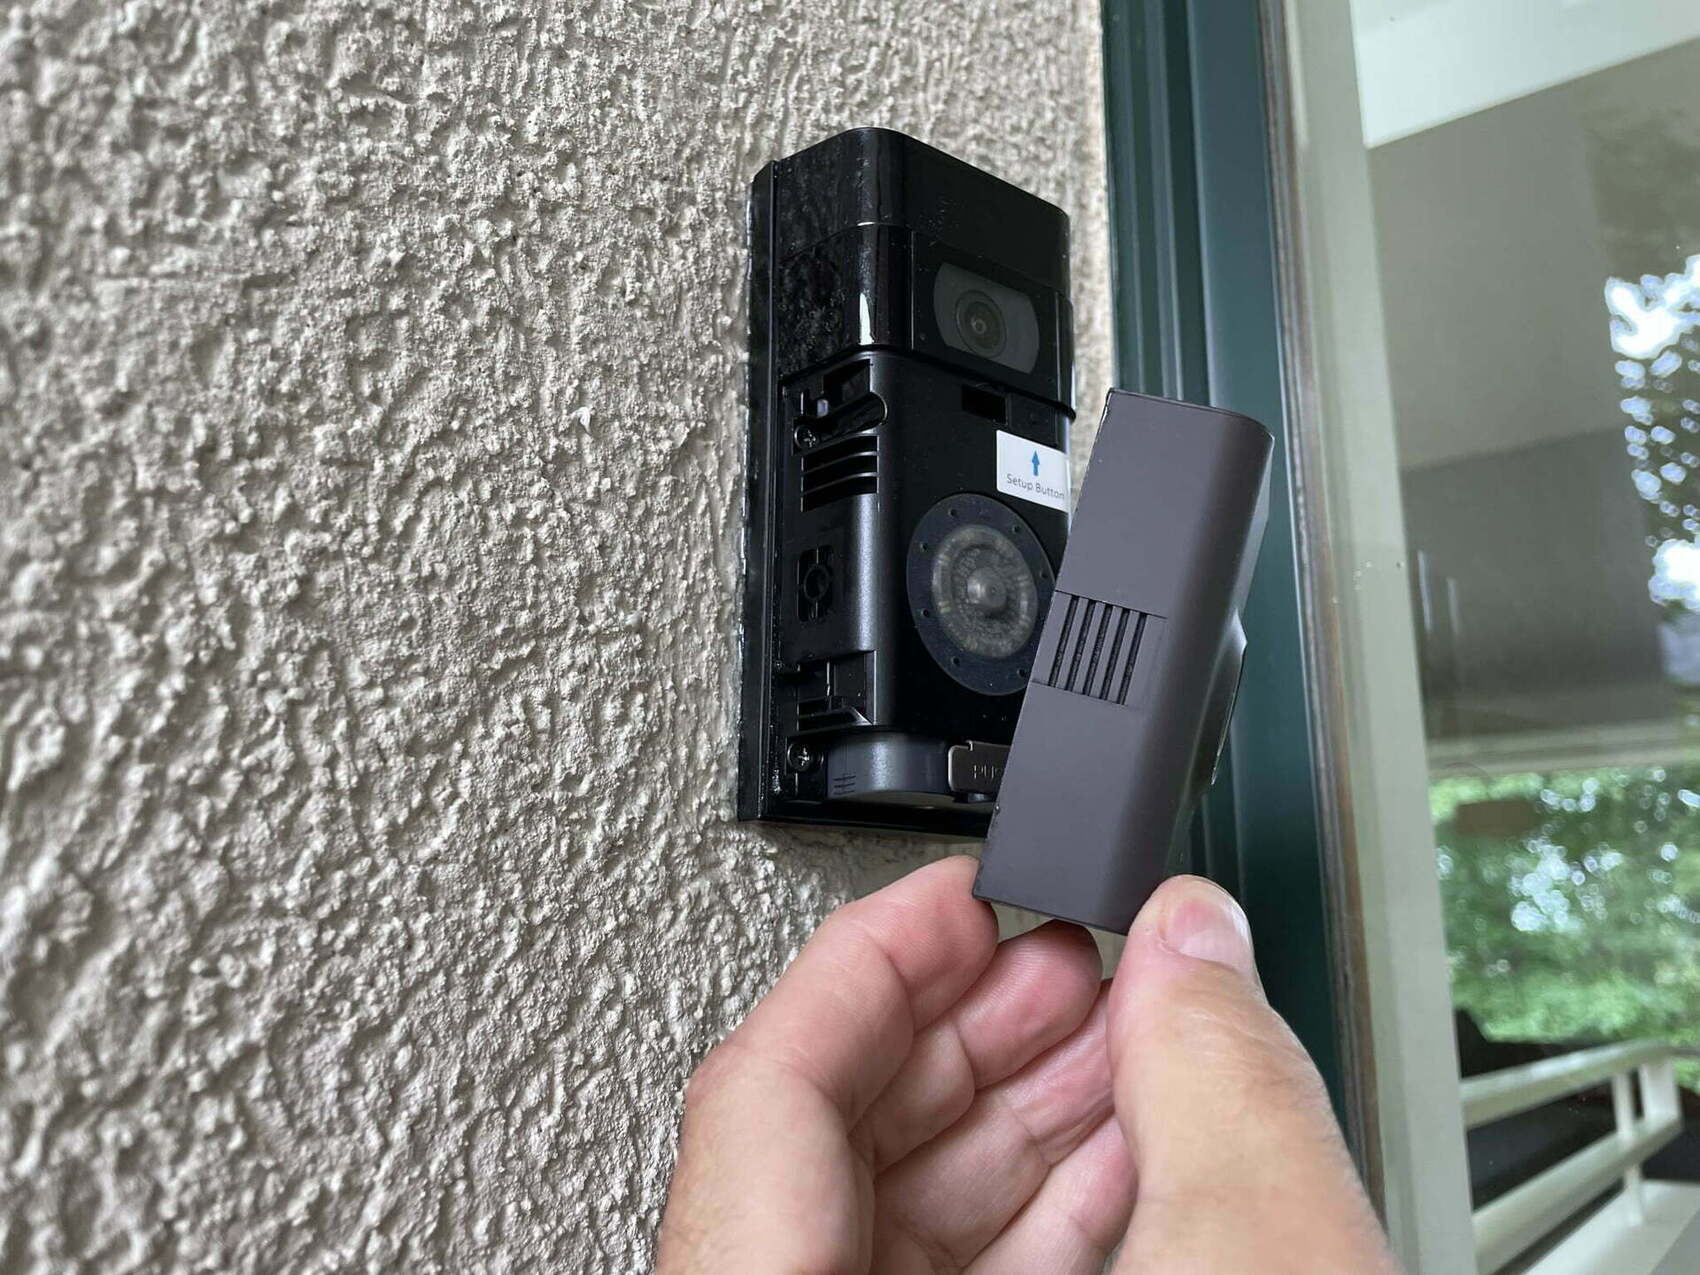 How To Remove Ring Video Doorbell